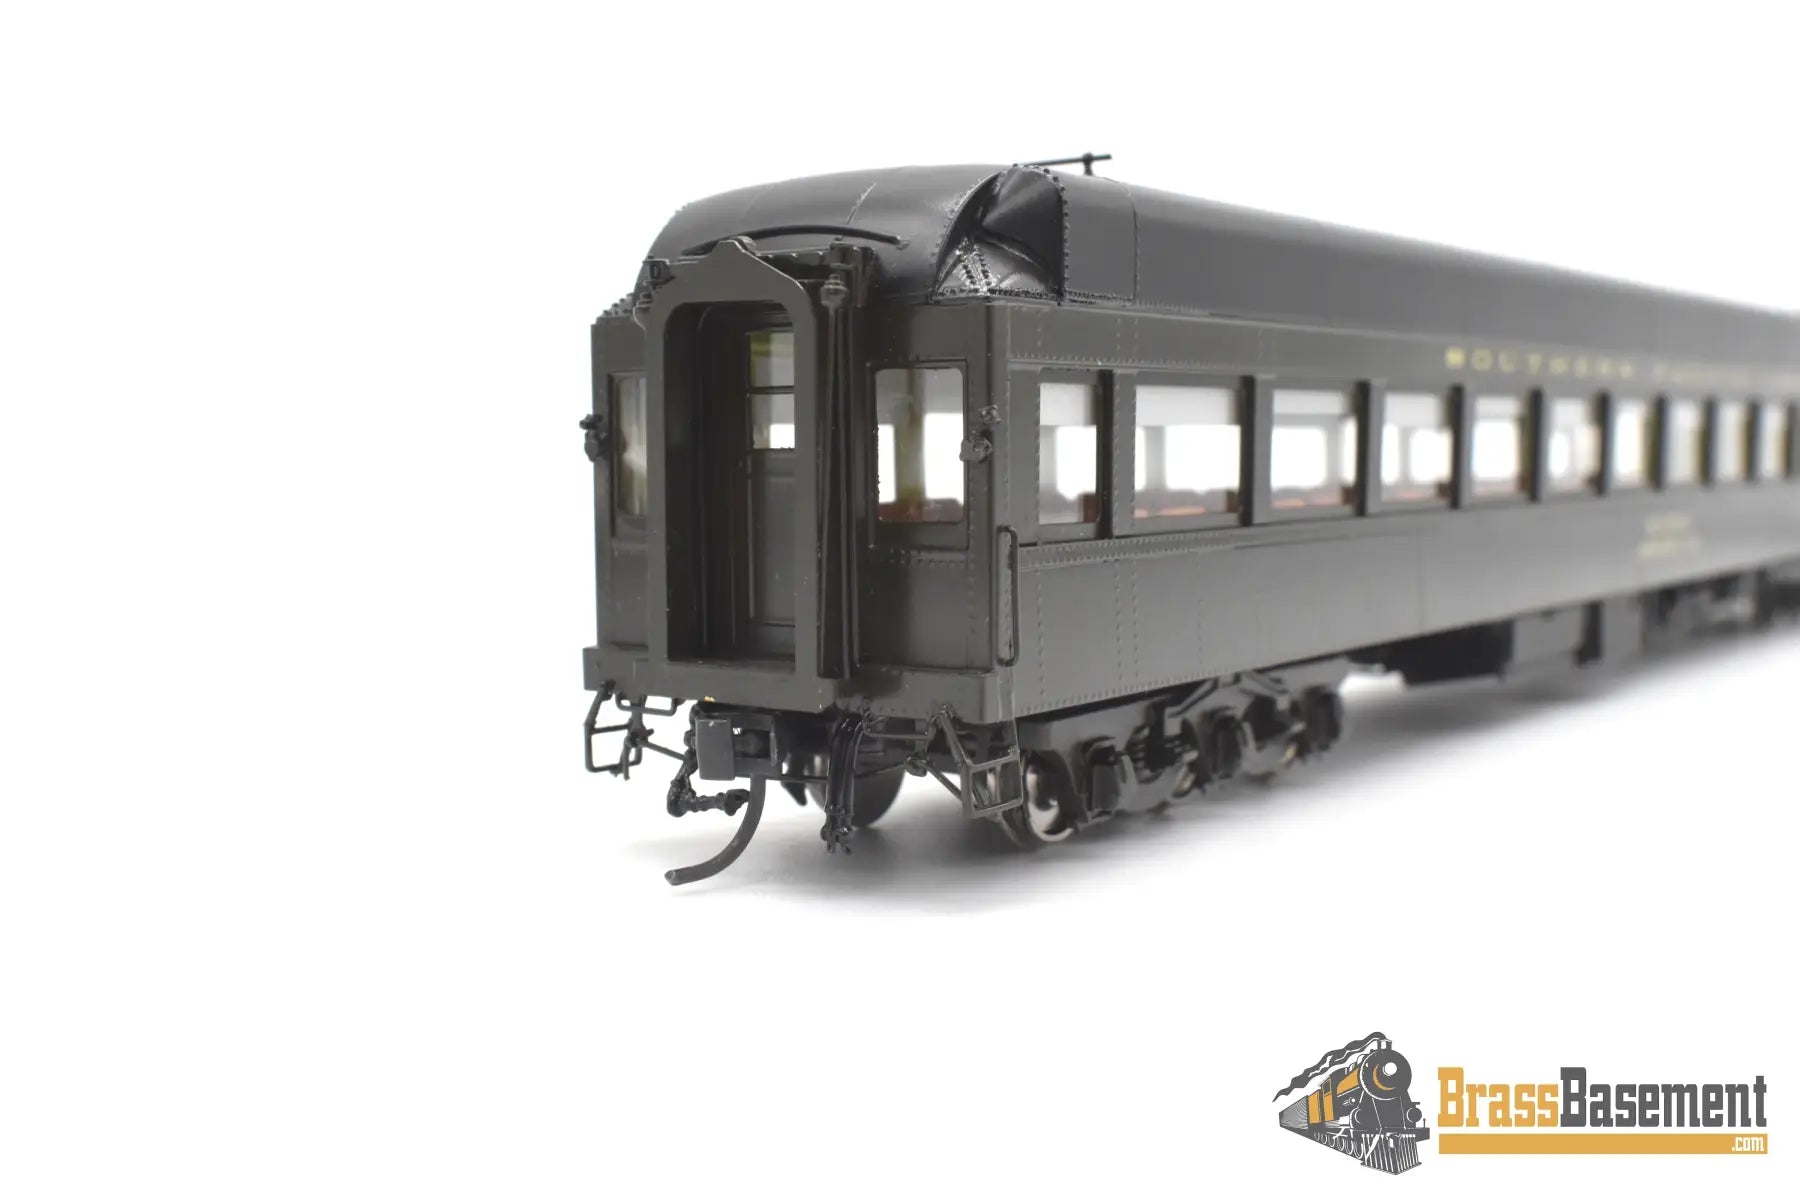 Ho Brass - Tcy 0916 Southern Pacific Lines Spl #2904 Assembly Car 75 - O - 1 F/P Interior Passenger